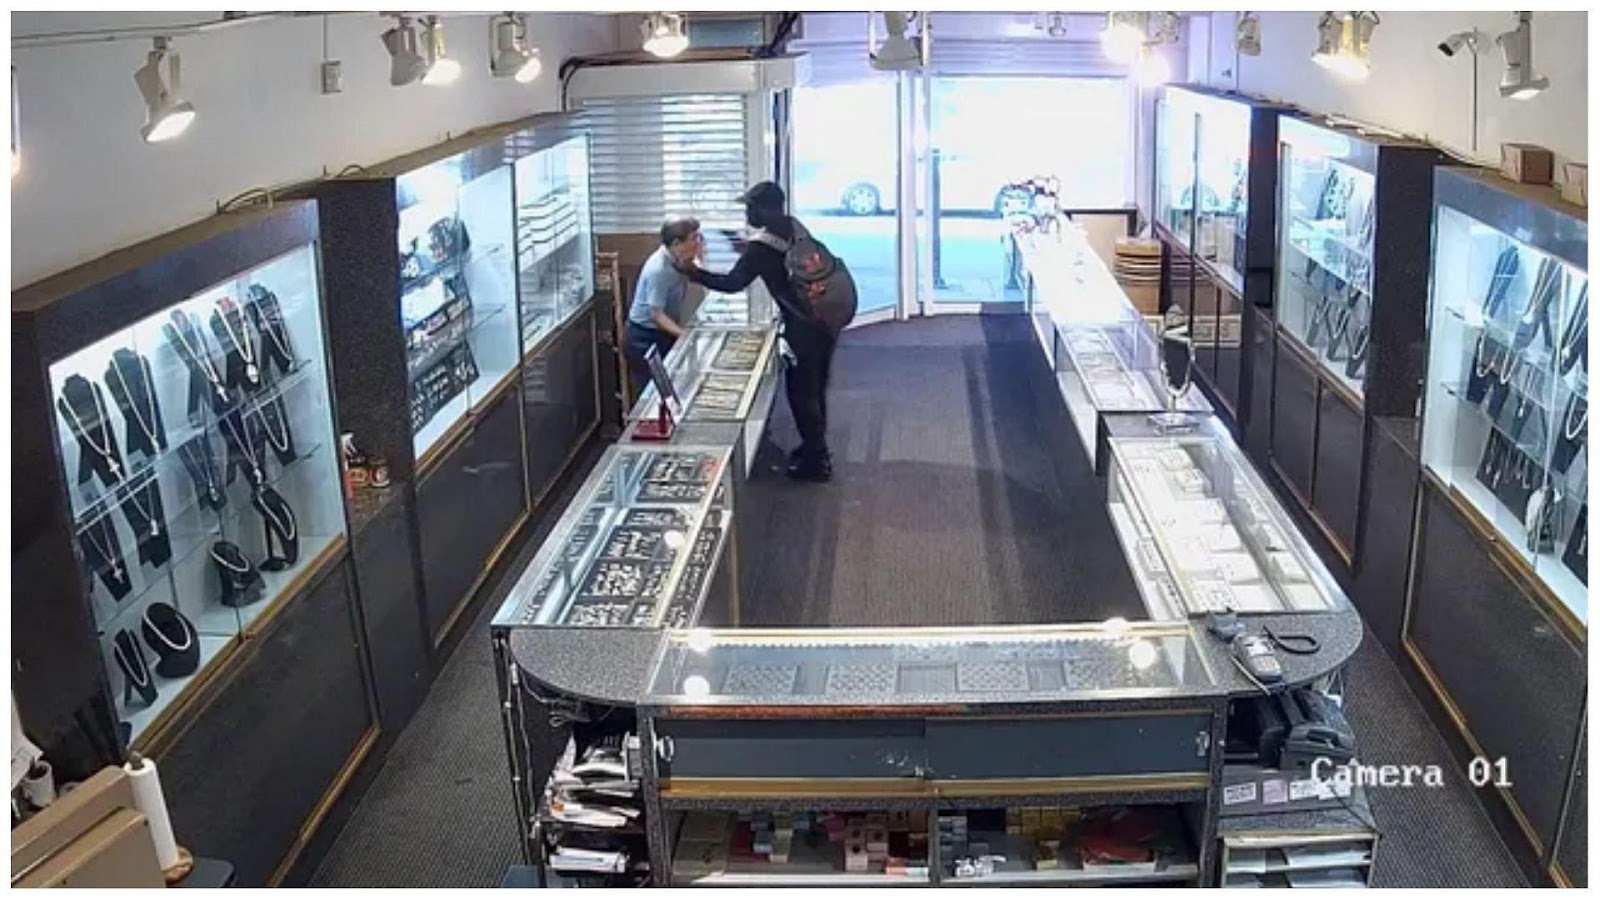 Authorities have reported that the suspect is at large (image via Solid Gold Jewelers)